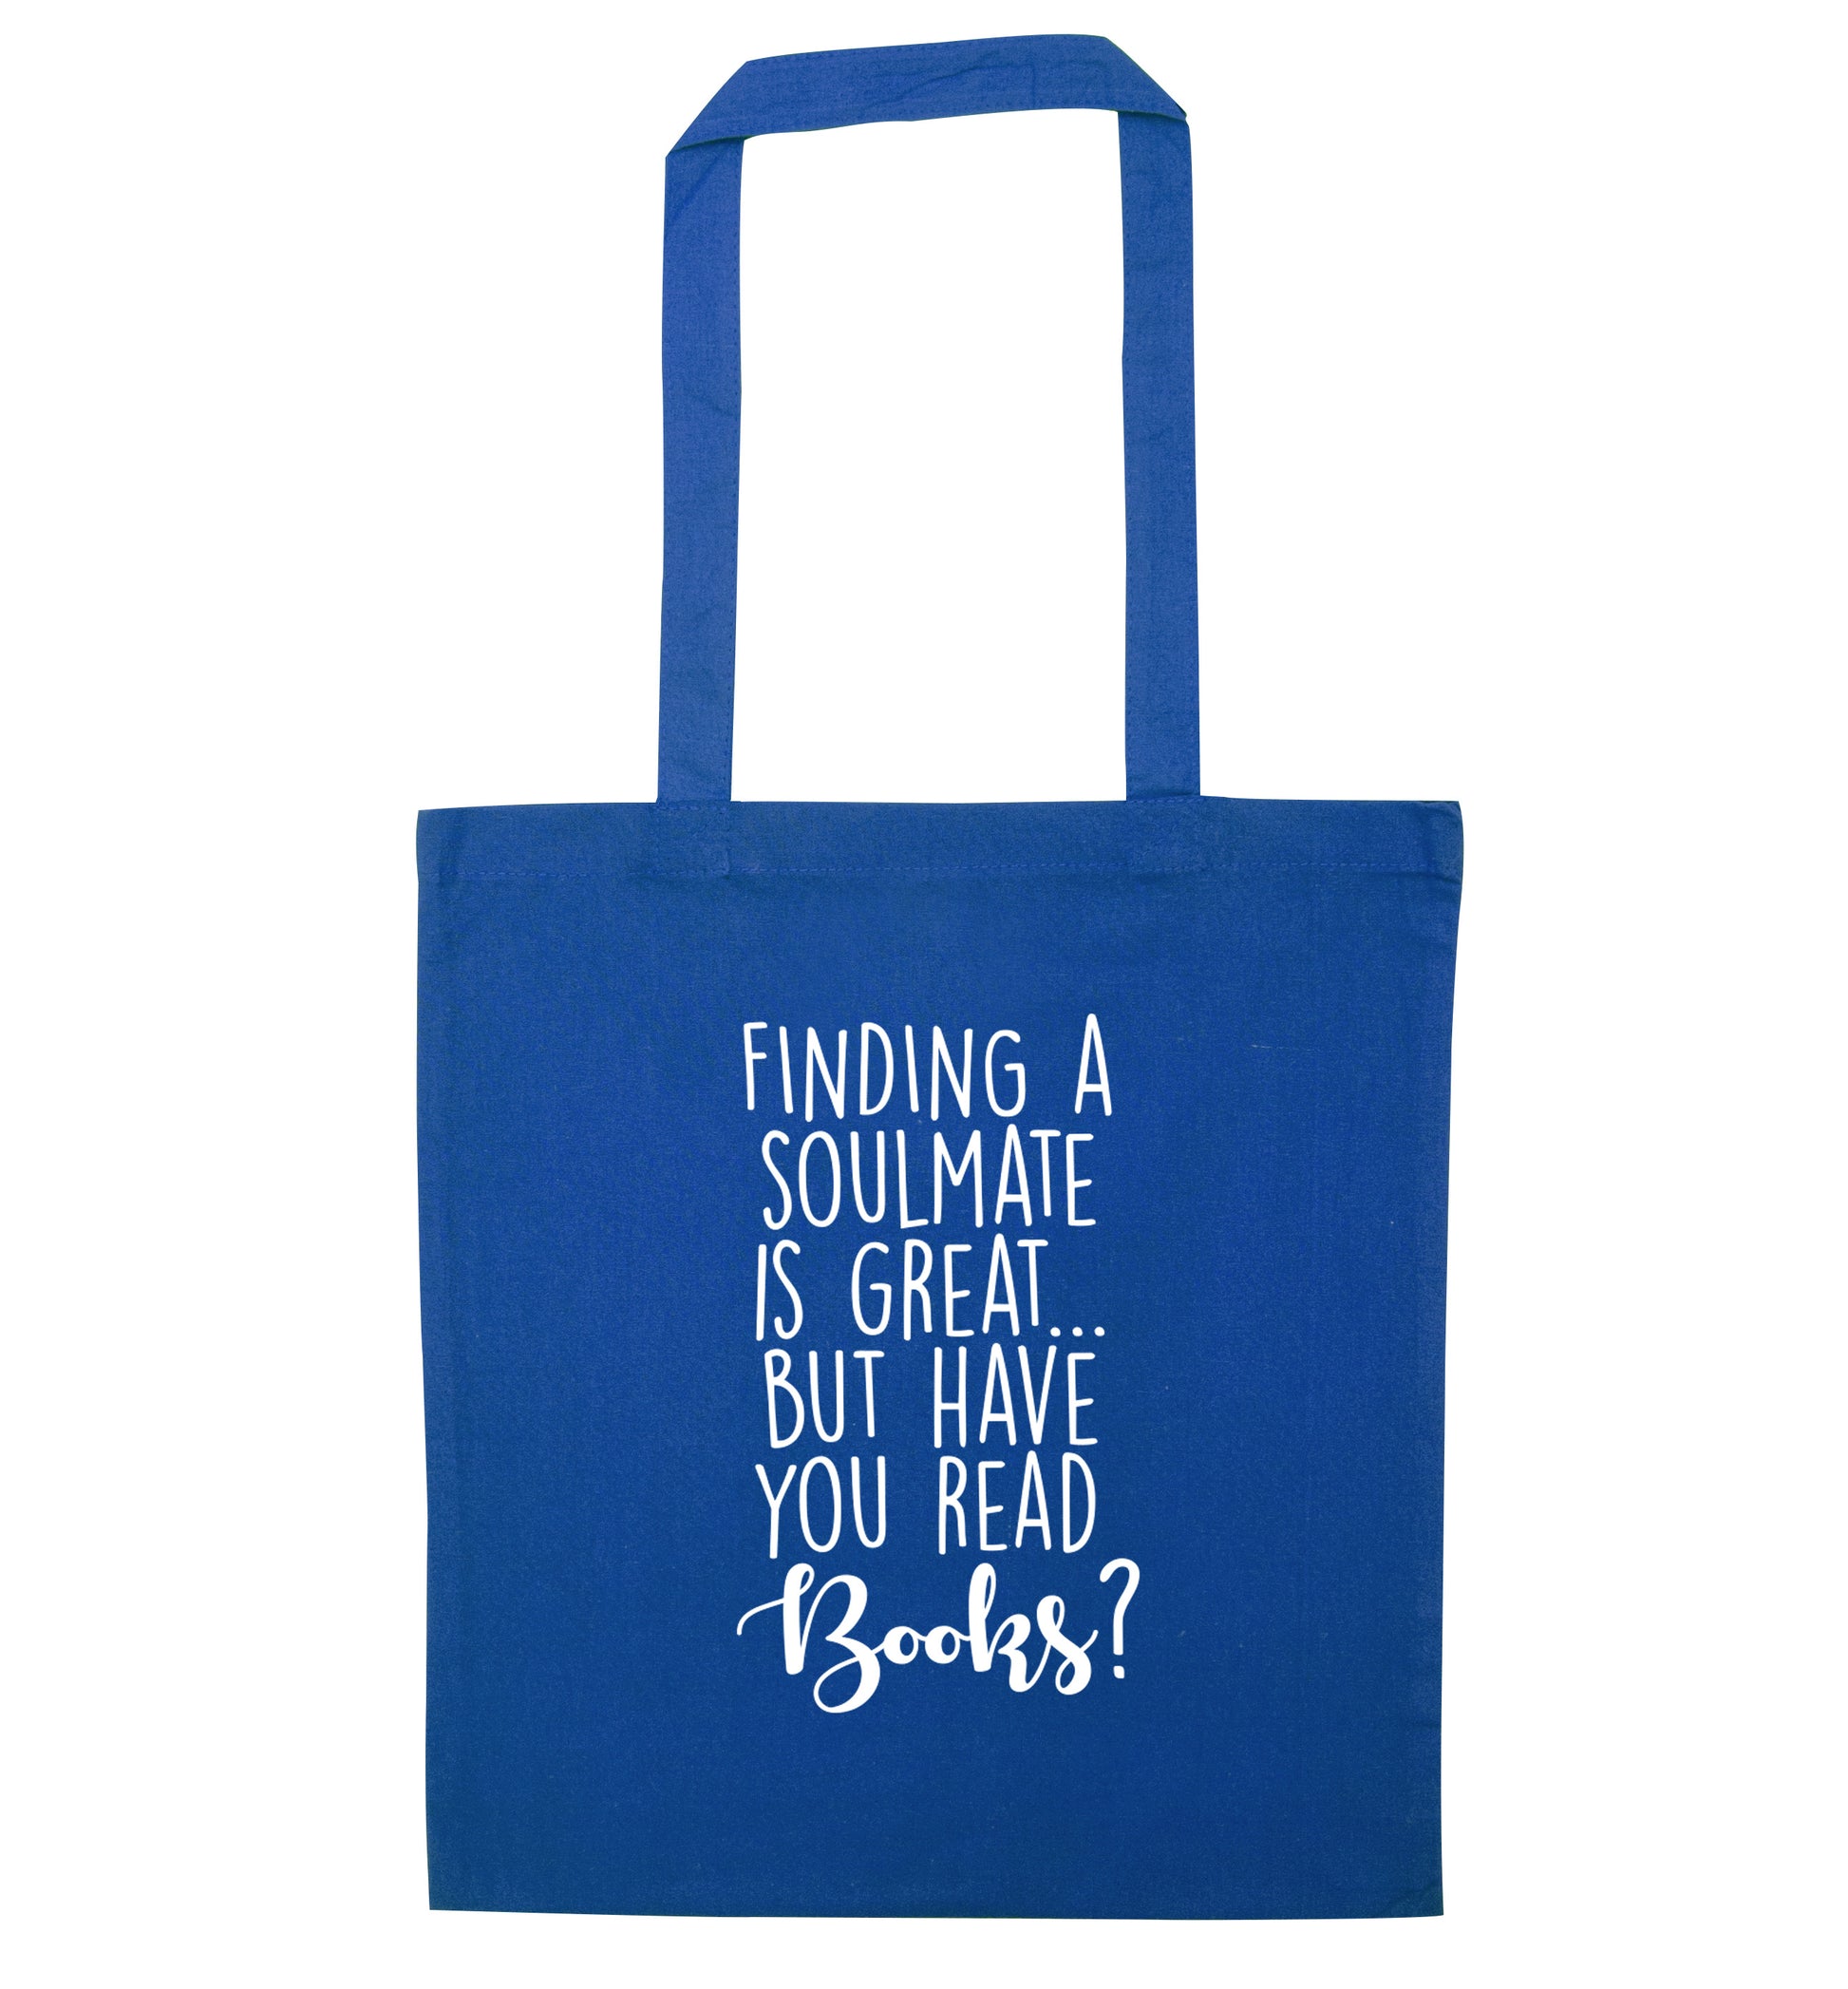 Finding a soulmate is great but have you read books? blue tote bag